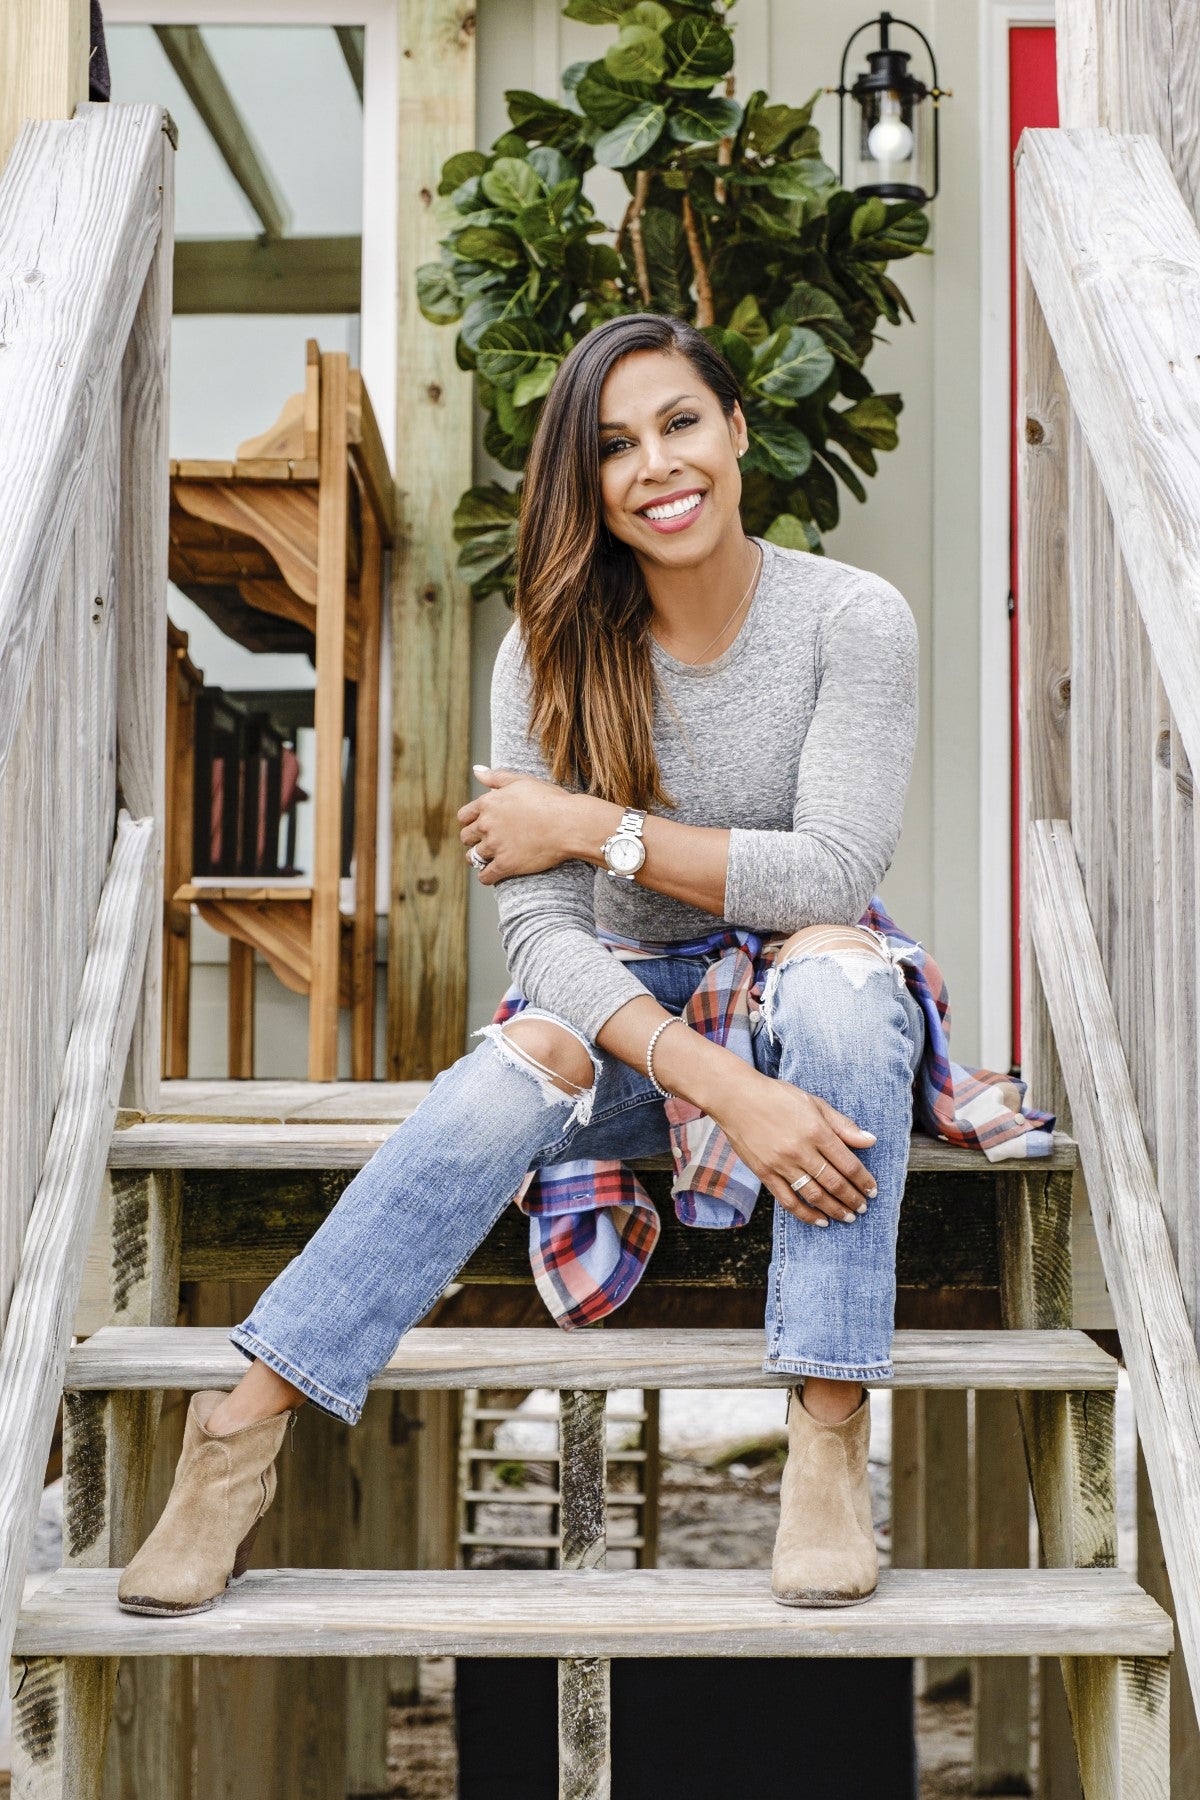 Taniya Nayak of HGTV's Battle on the Beach. She is wearing a heather cray long-sleeved shirt, has a red plaid flannel tied around her waist, and is wearing blue jeans while sitting on steps.